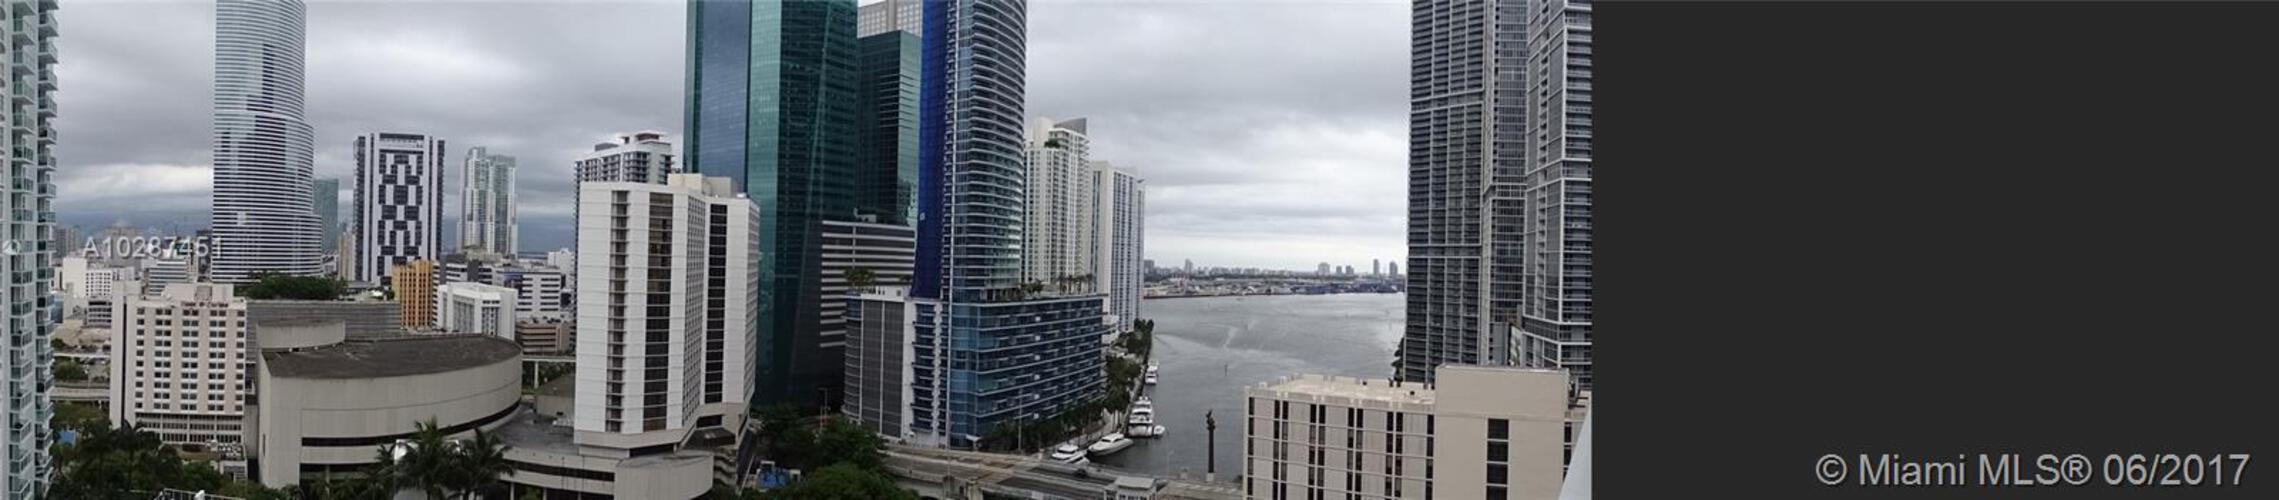 Brickell on the River South image #17